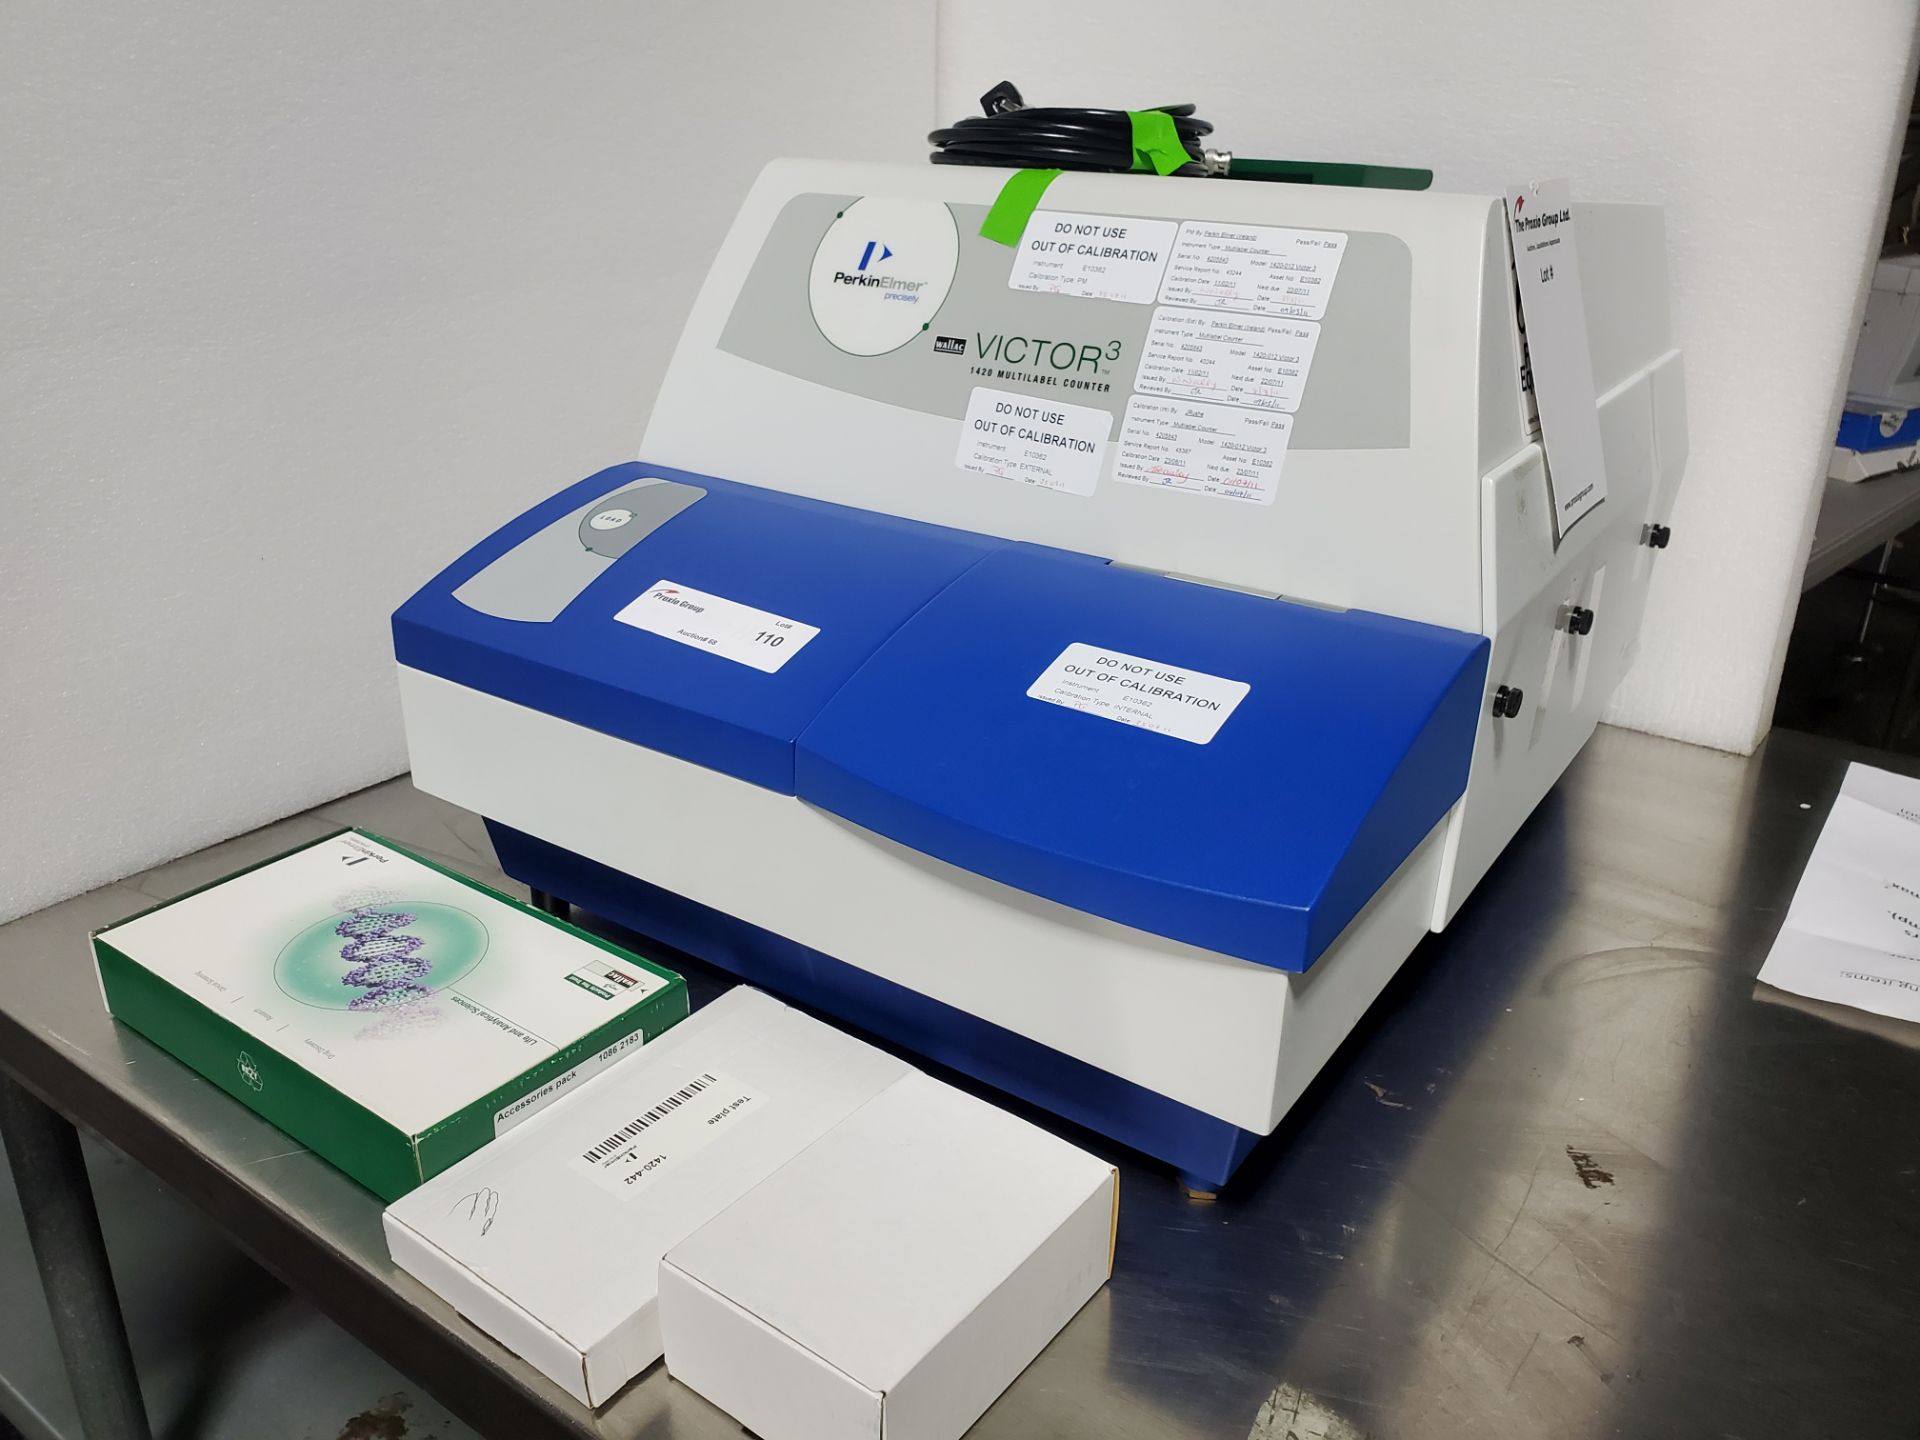 Perkin Elmer Victor III Multilable Counter, with filter wheel, test plate and other components,